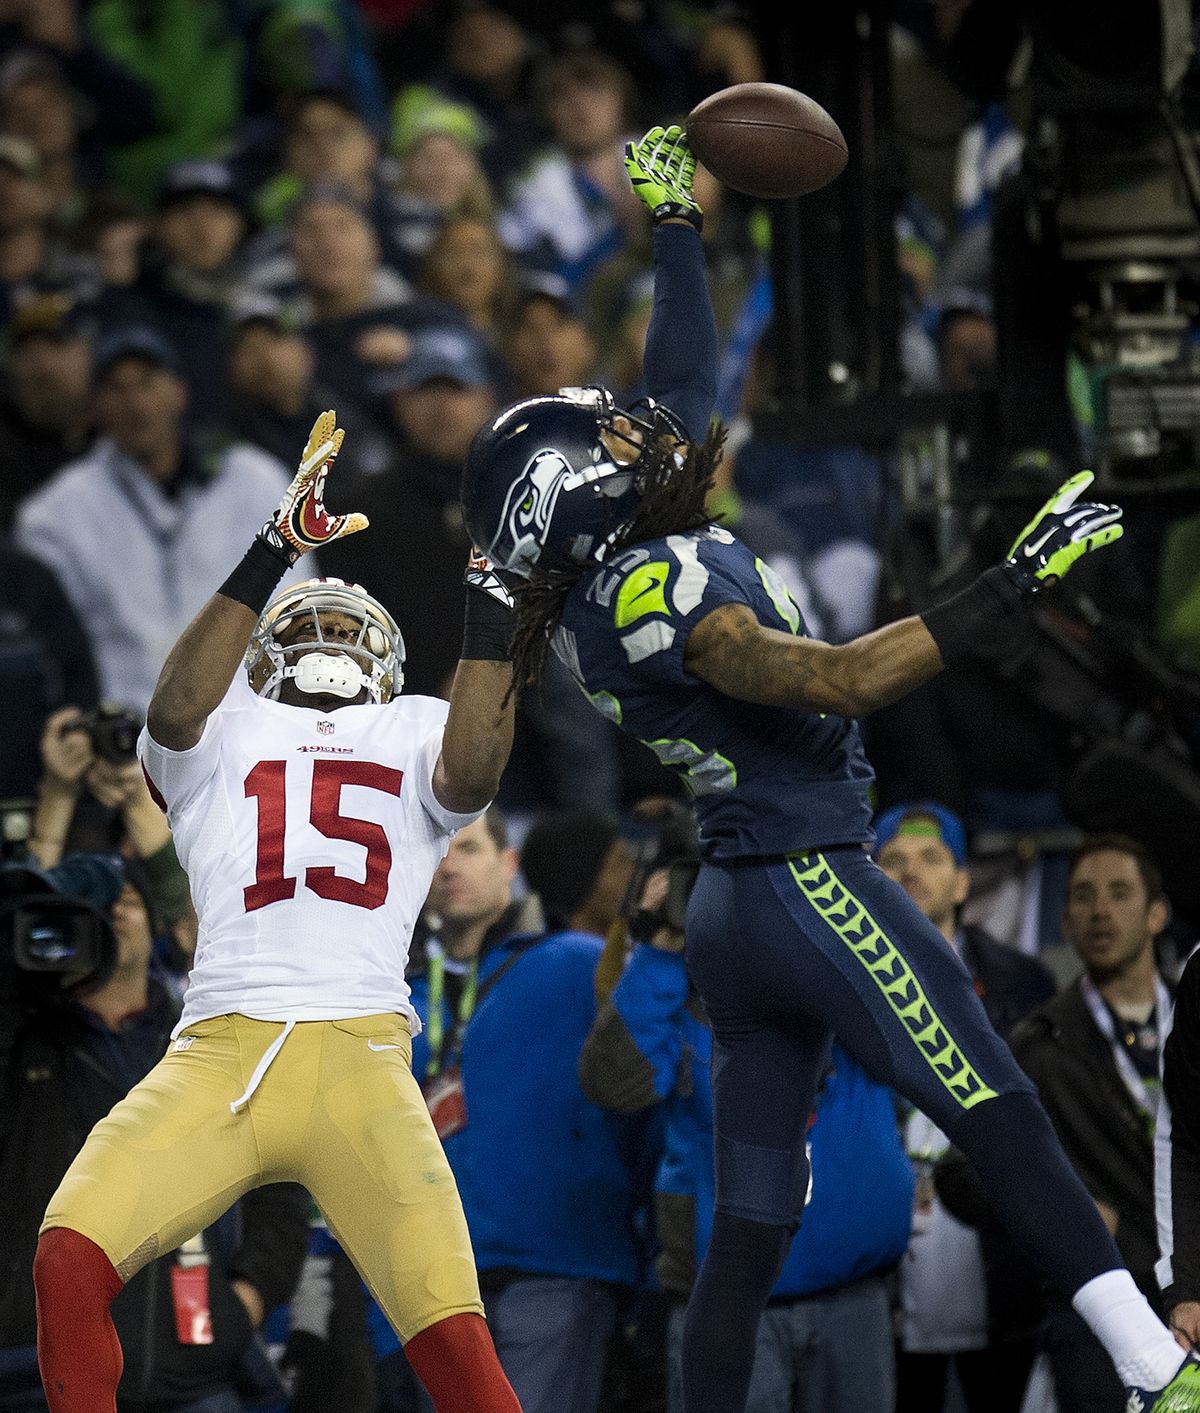 Seattle Seahawks cornerback Richard Sherman made the big play against San Francisco’s Michael Crabtree to propel the Seahawks into the Super Bowl. (Associated Press)